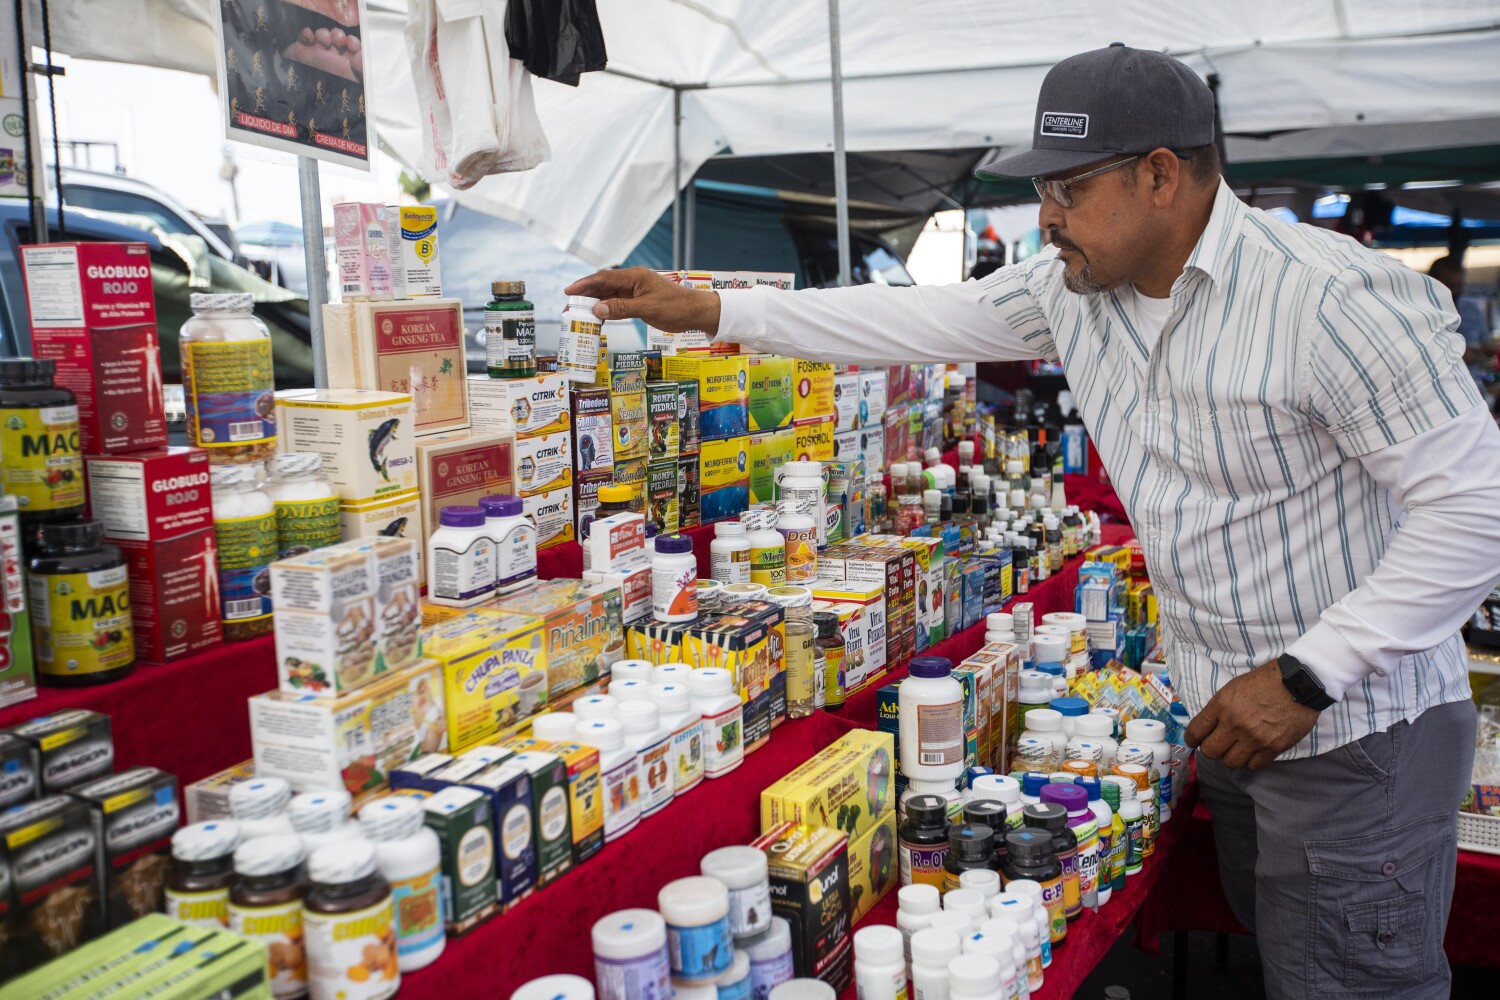 L.A. City College swap meet shuts down after more than two decades